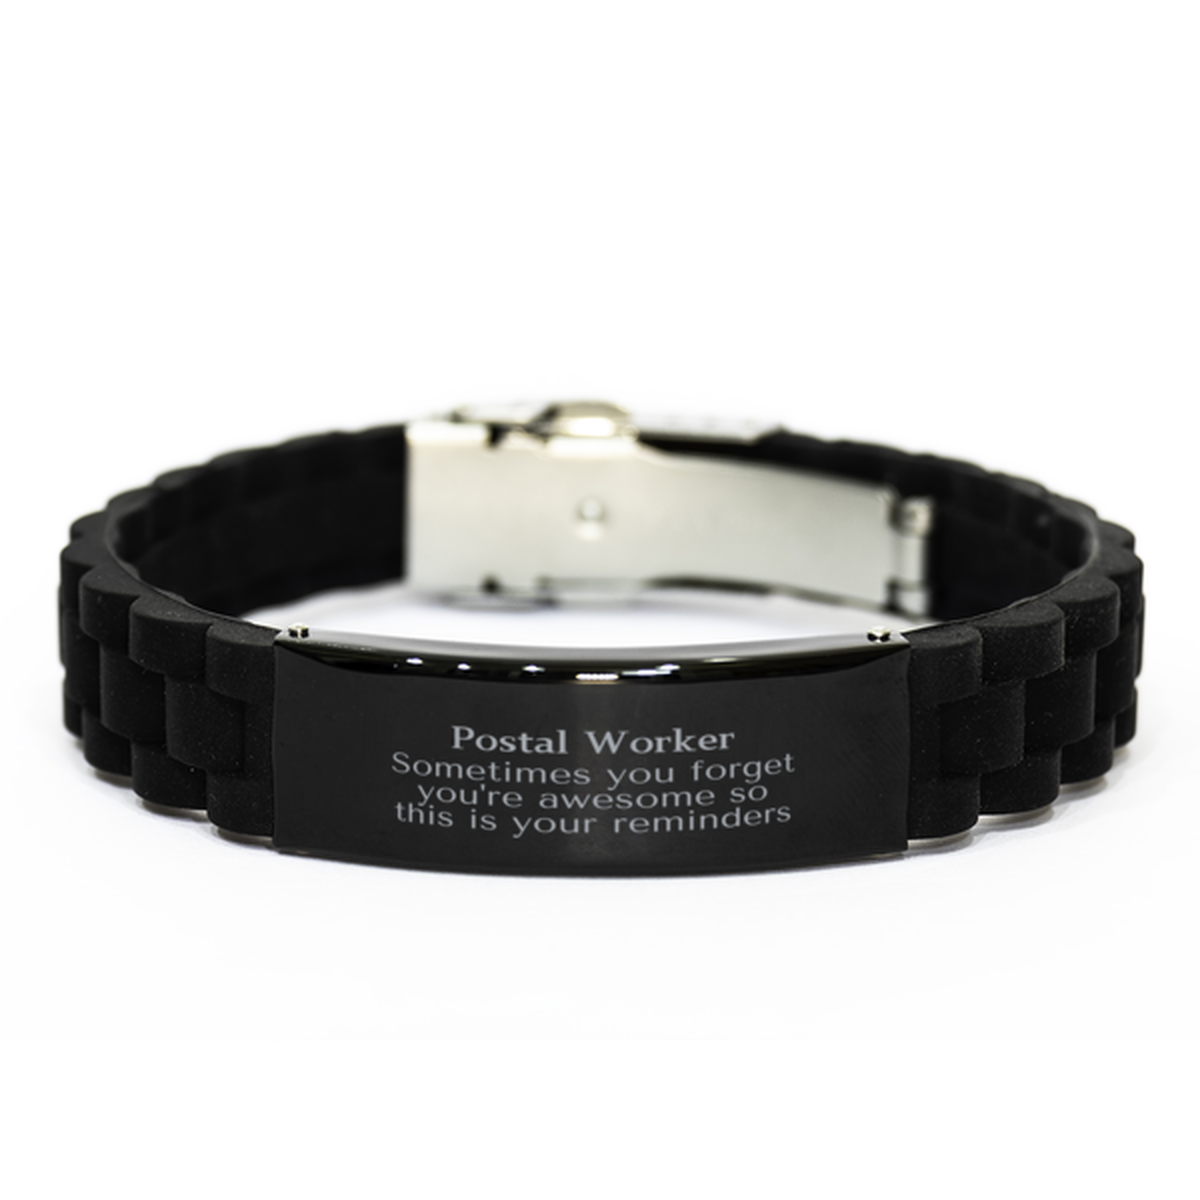 Sentimental Postal Worker Black Glidelock Clasp Bracelet, Postal Worker Sometimes you forget you're awesome so this is your reminders, Graduation Christmas Birthday Gifts for Postal Worker, Men, Women, Coworkers